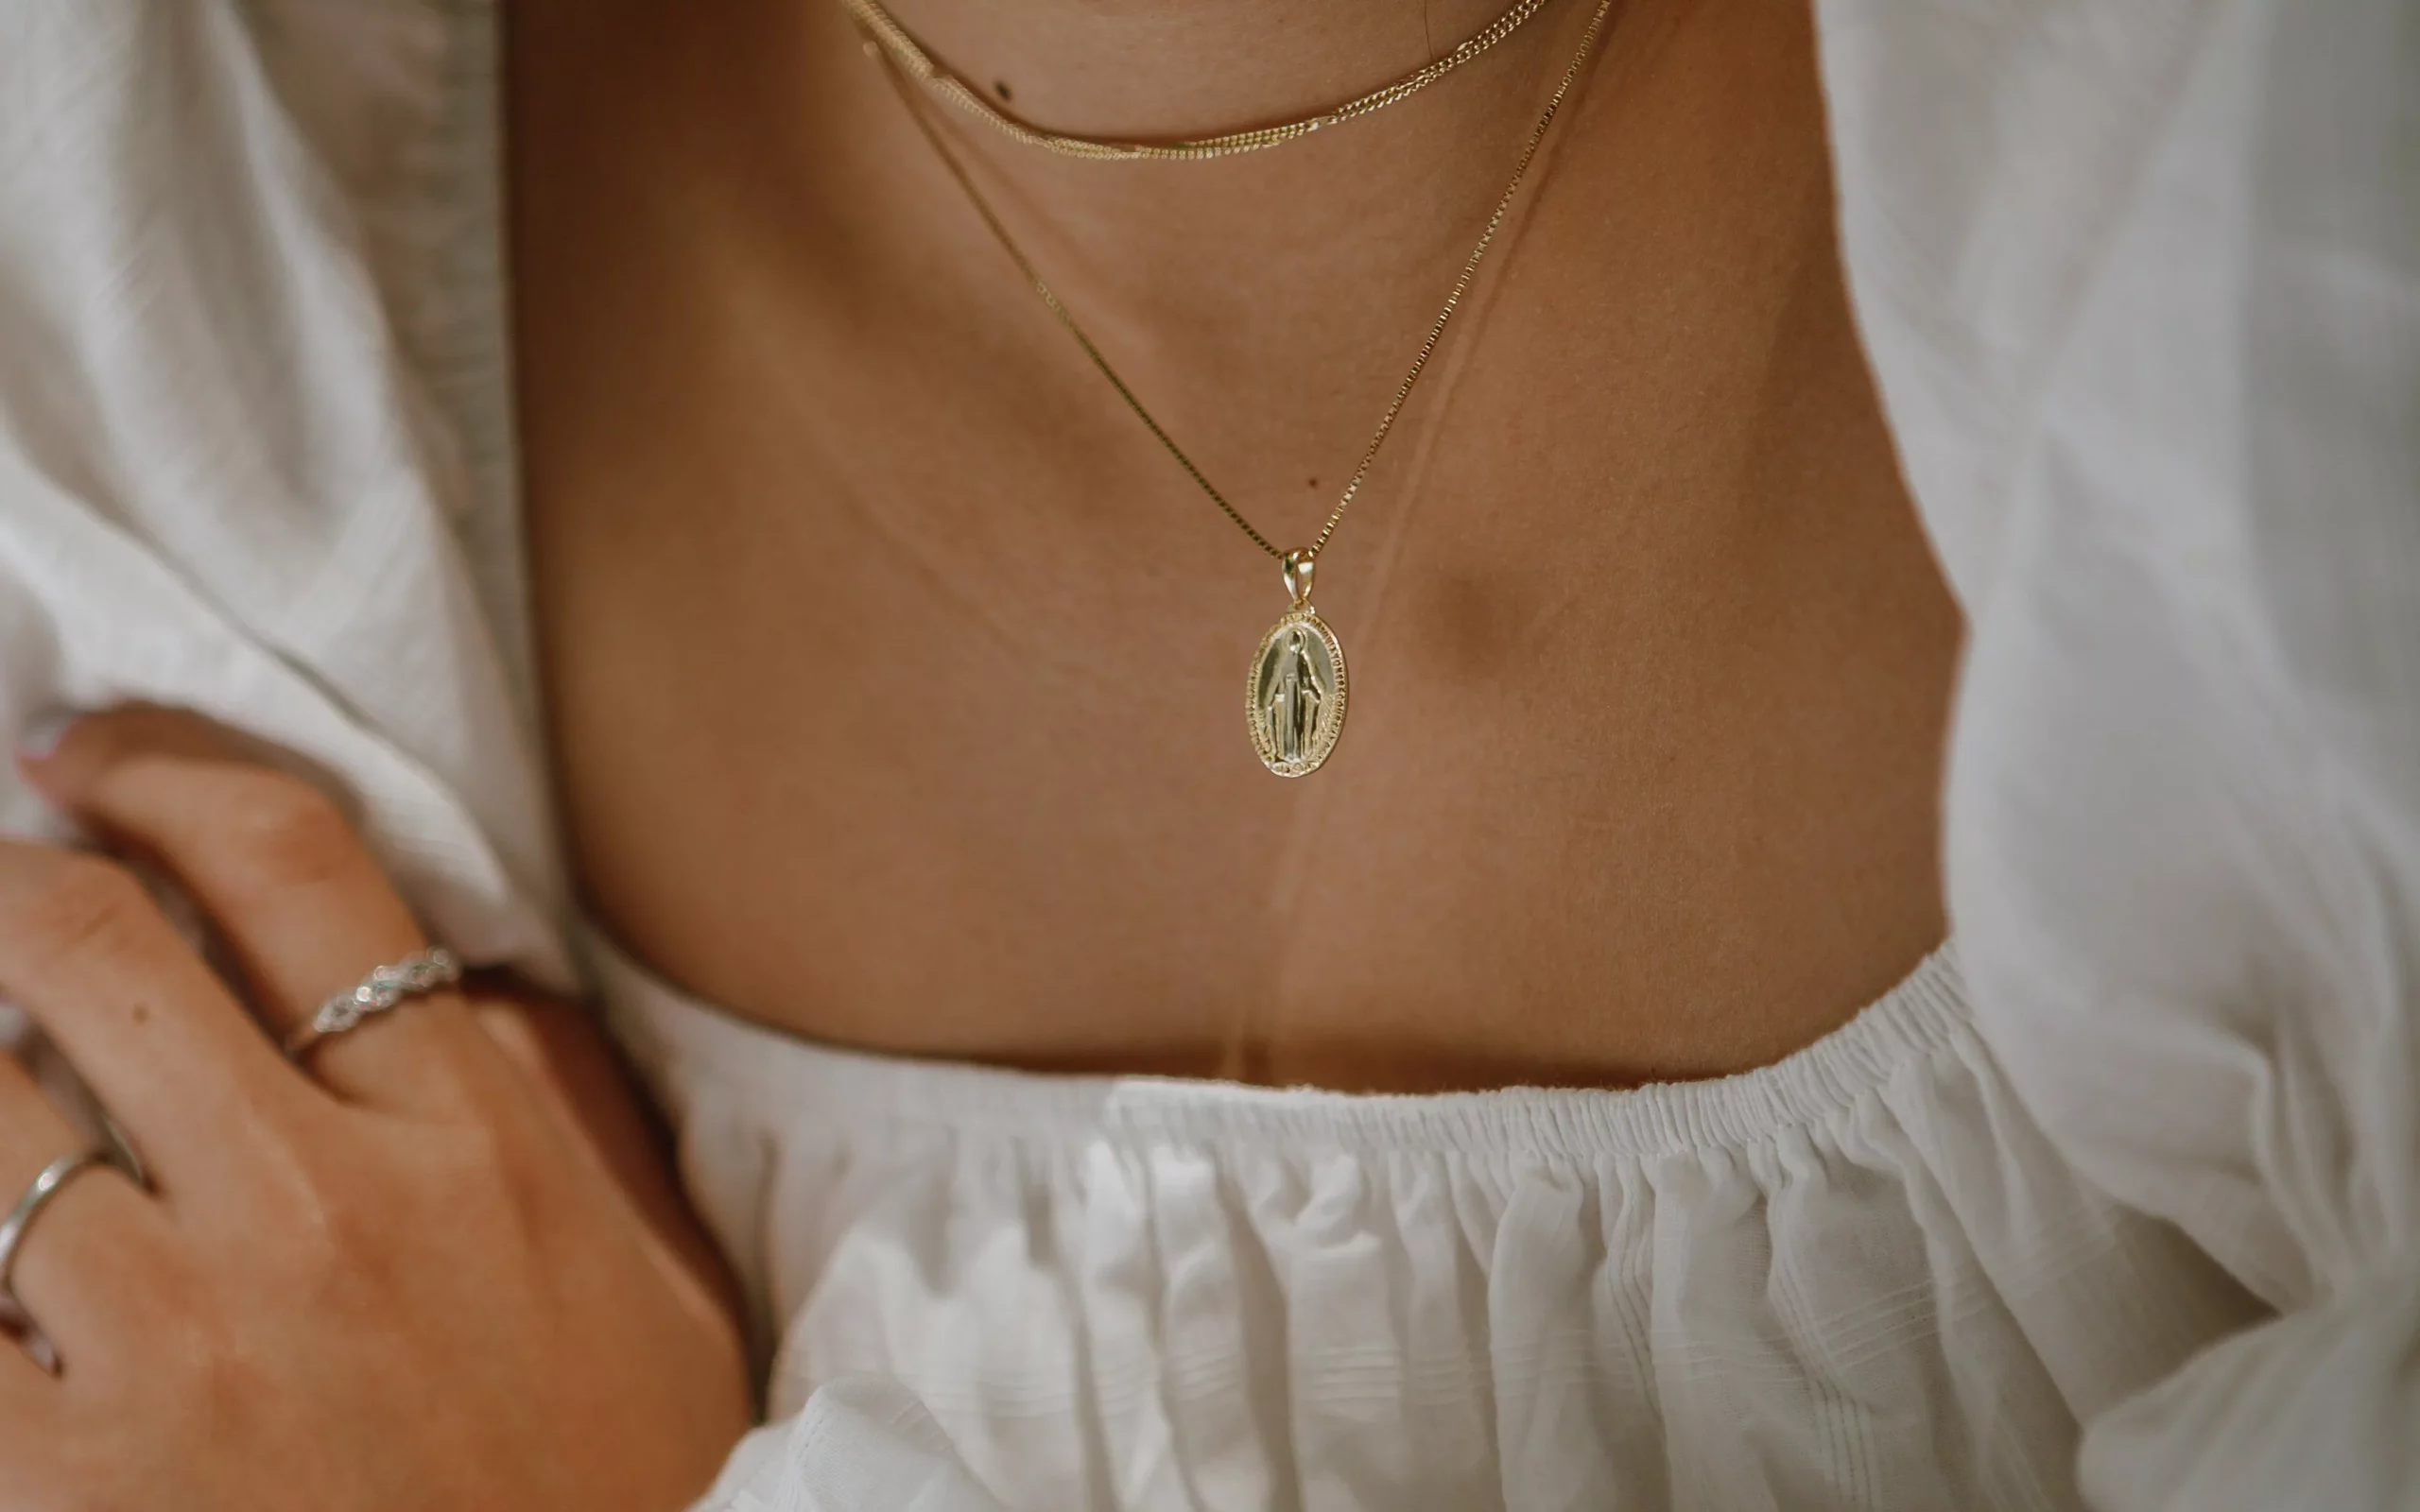 What Makes Jewelry Sustainable?